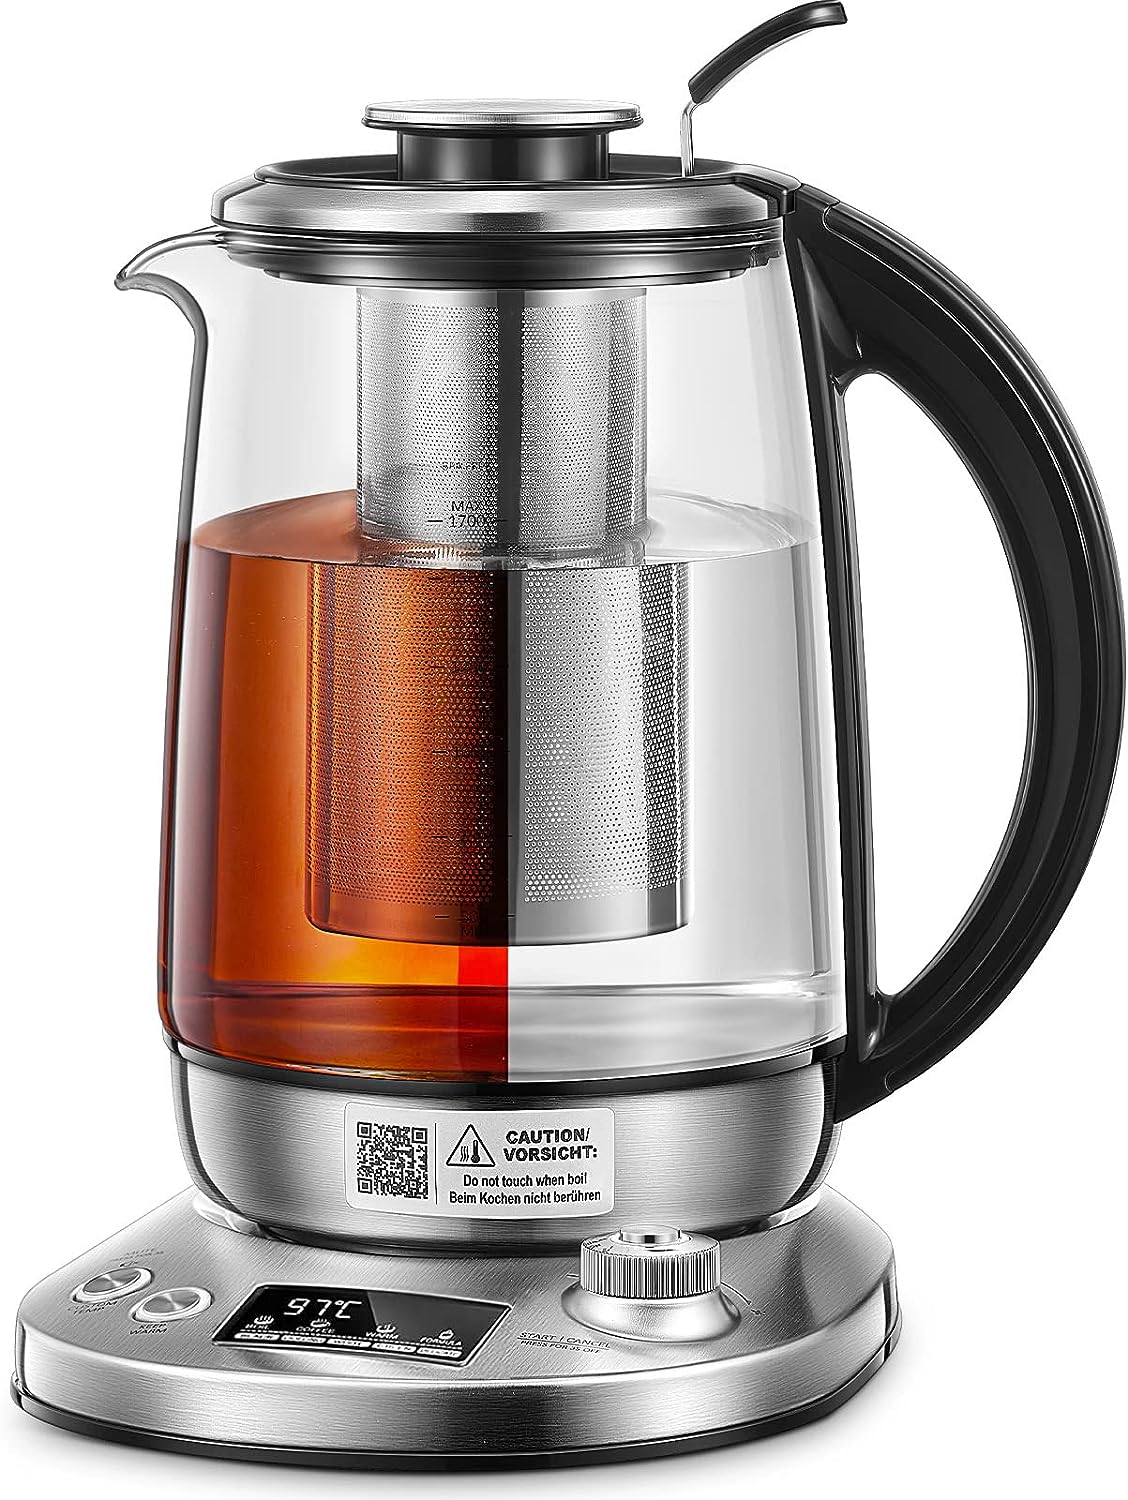 Kettle Electric Tea Maker with Removable Tea Infuser, 1.7 L